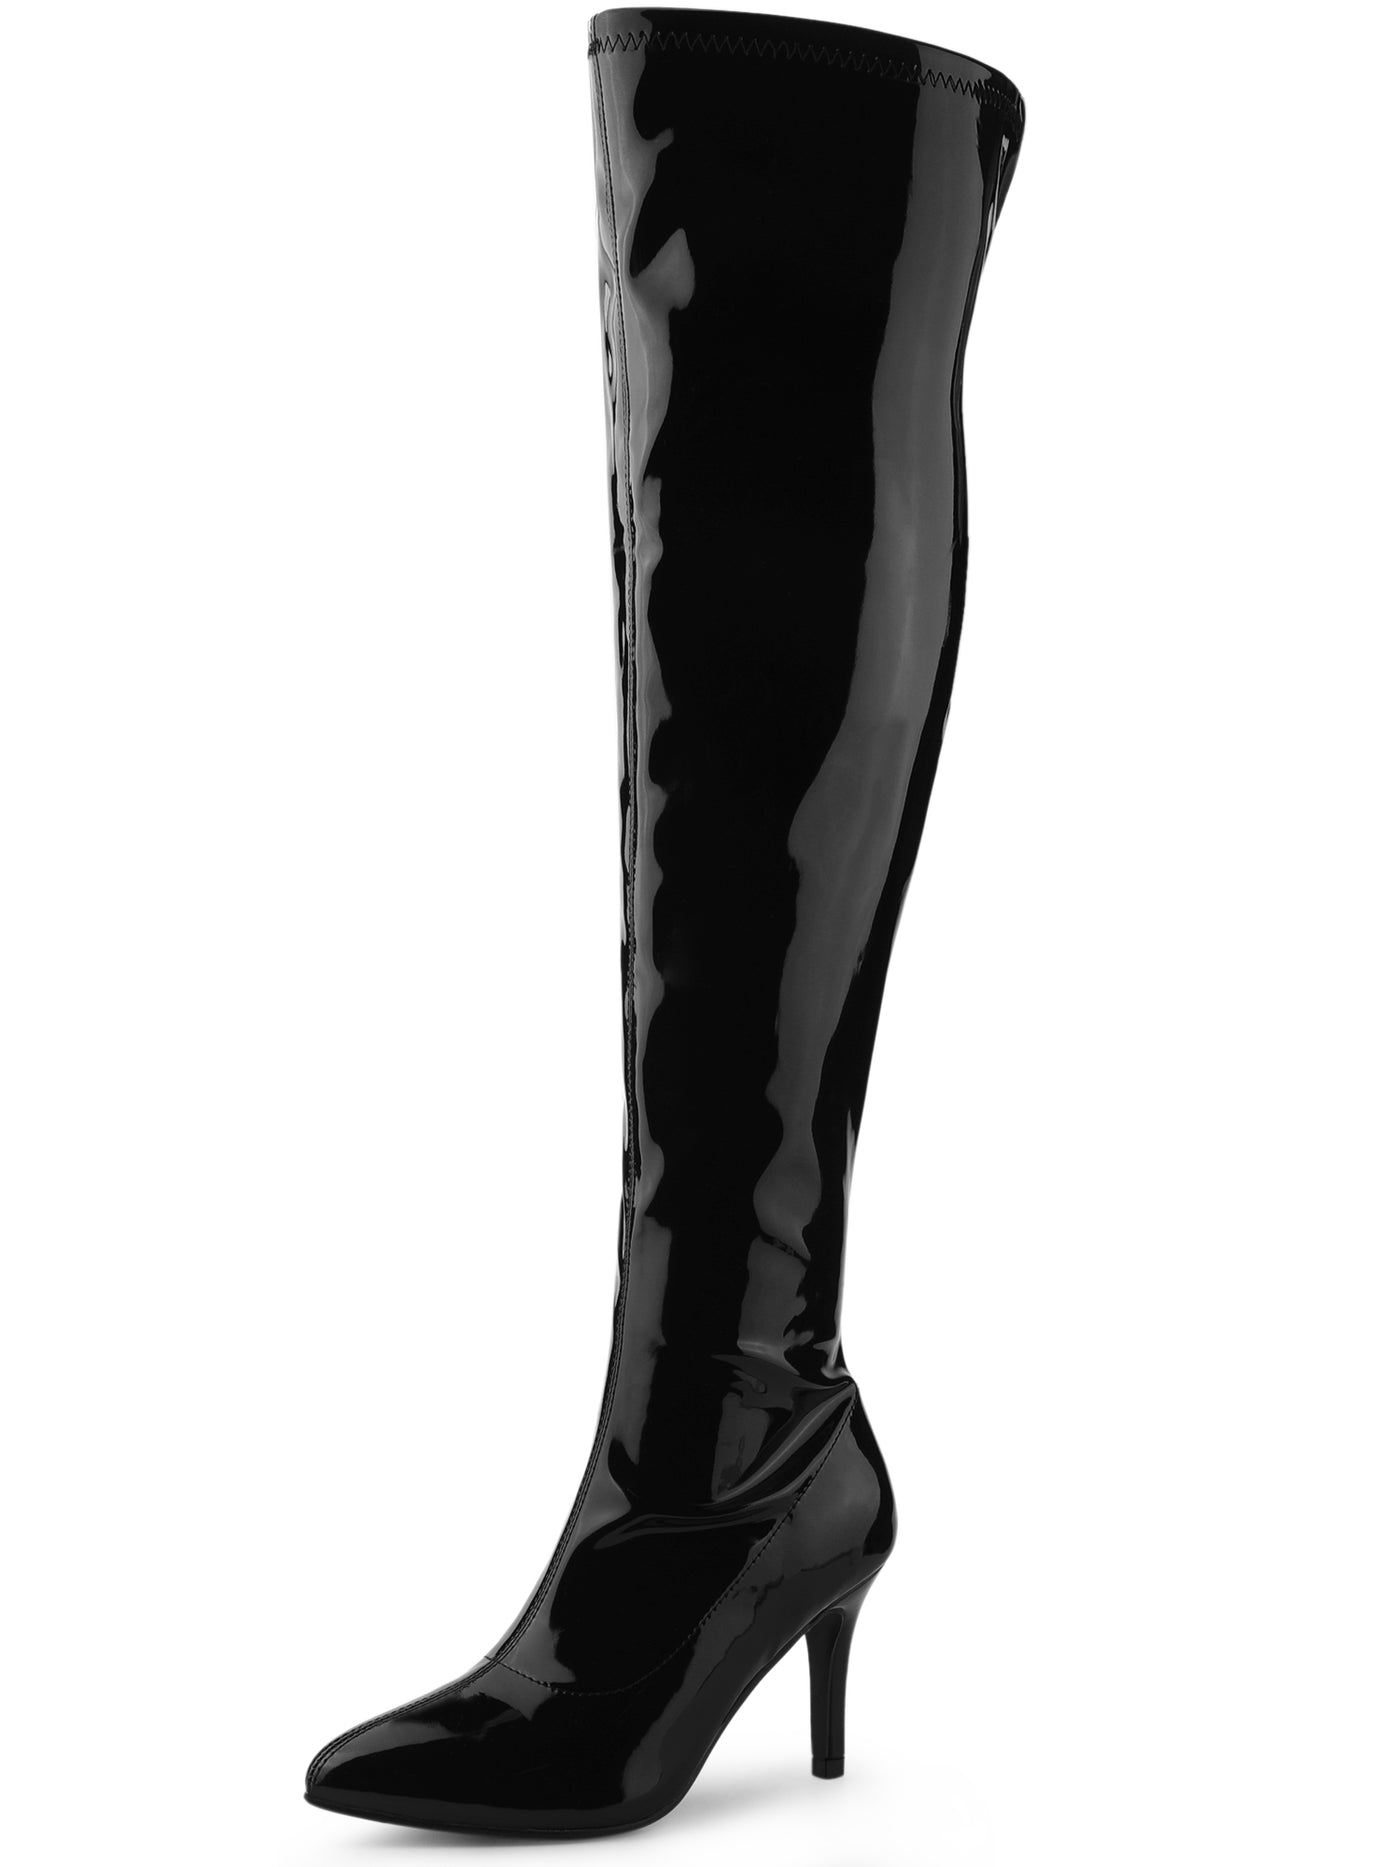 Allegra K Pointed Toe Stiletto Heel Over The Knee High Boots